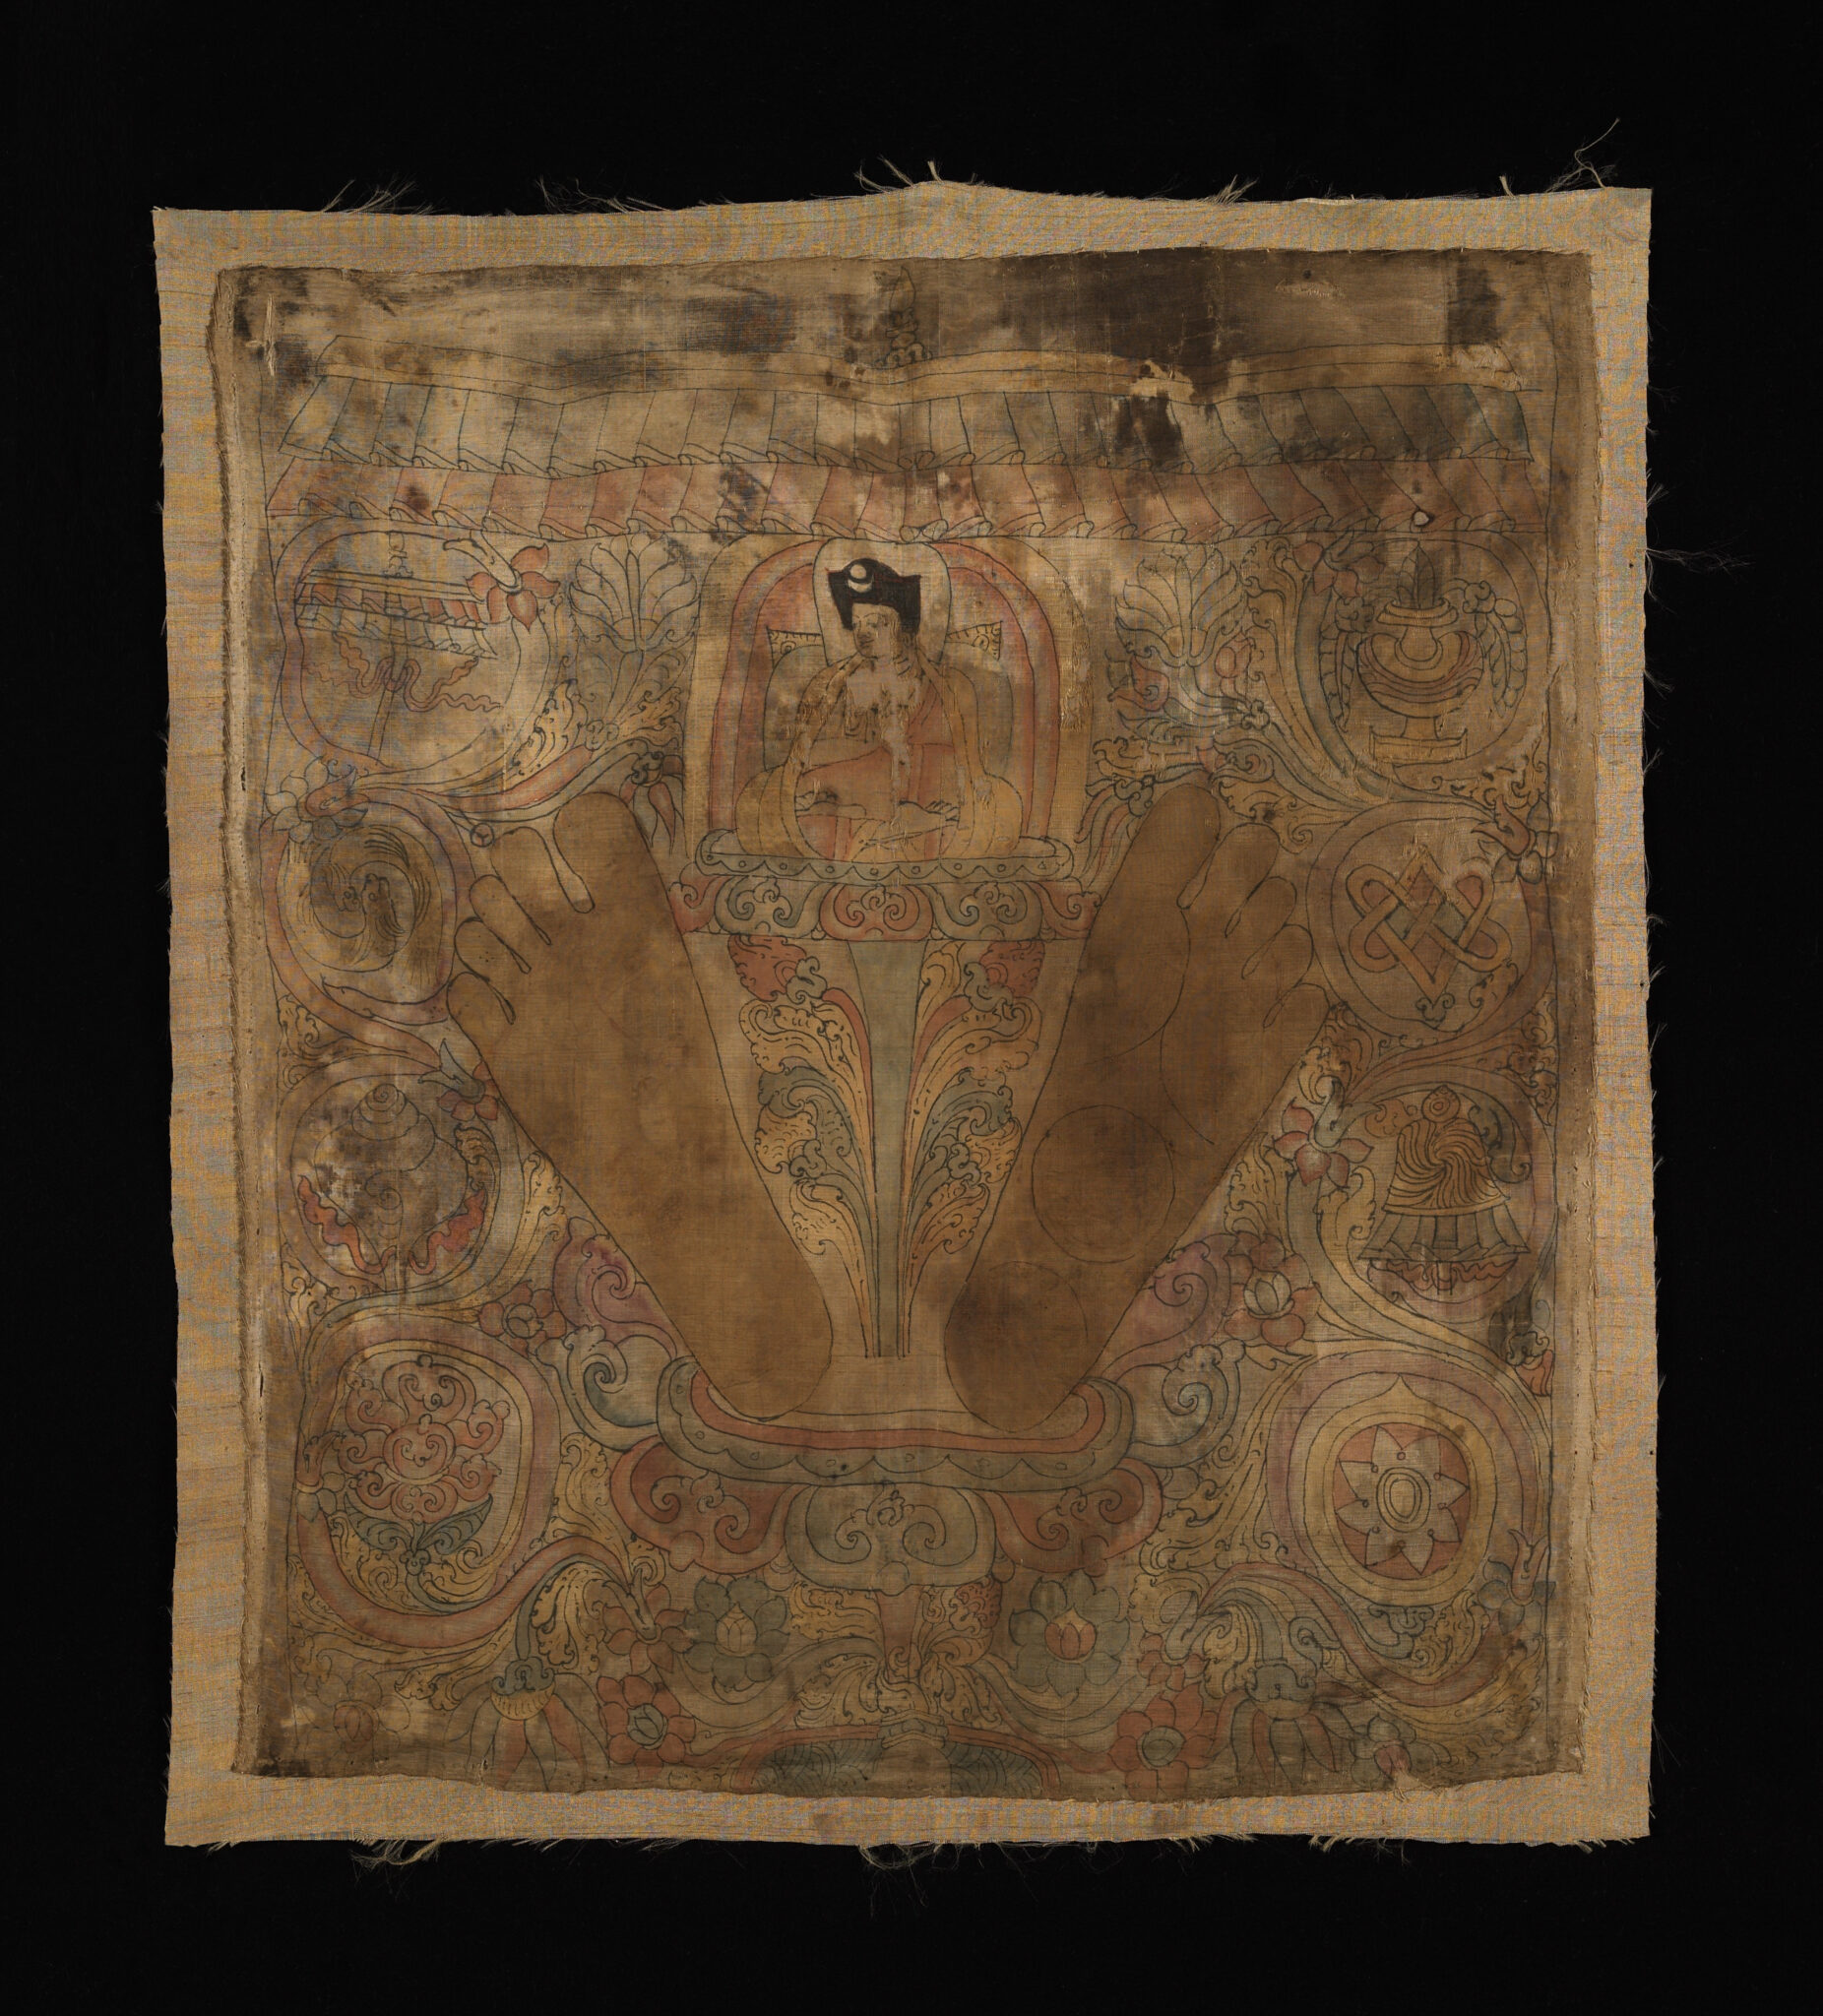 Mottled sepia textile featuring angled footprints standing astride deity seated on lotus amid floral motifs